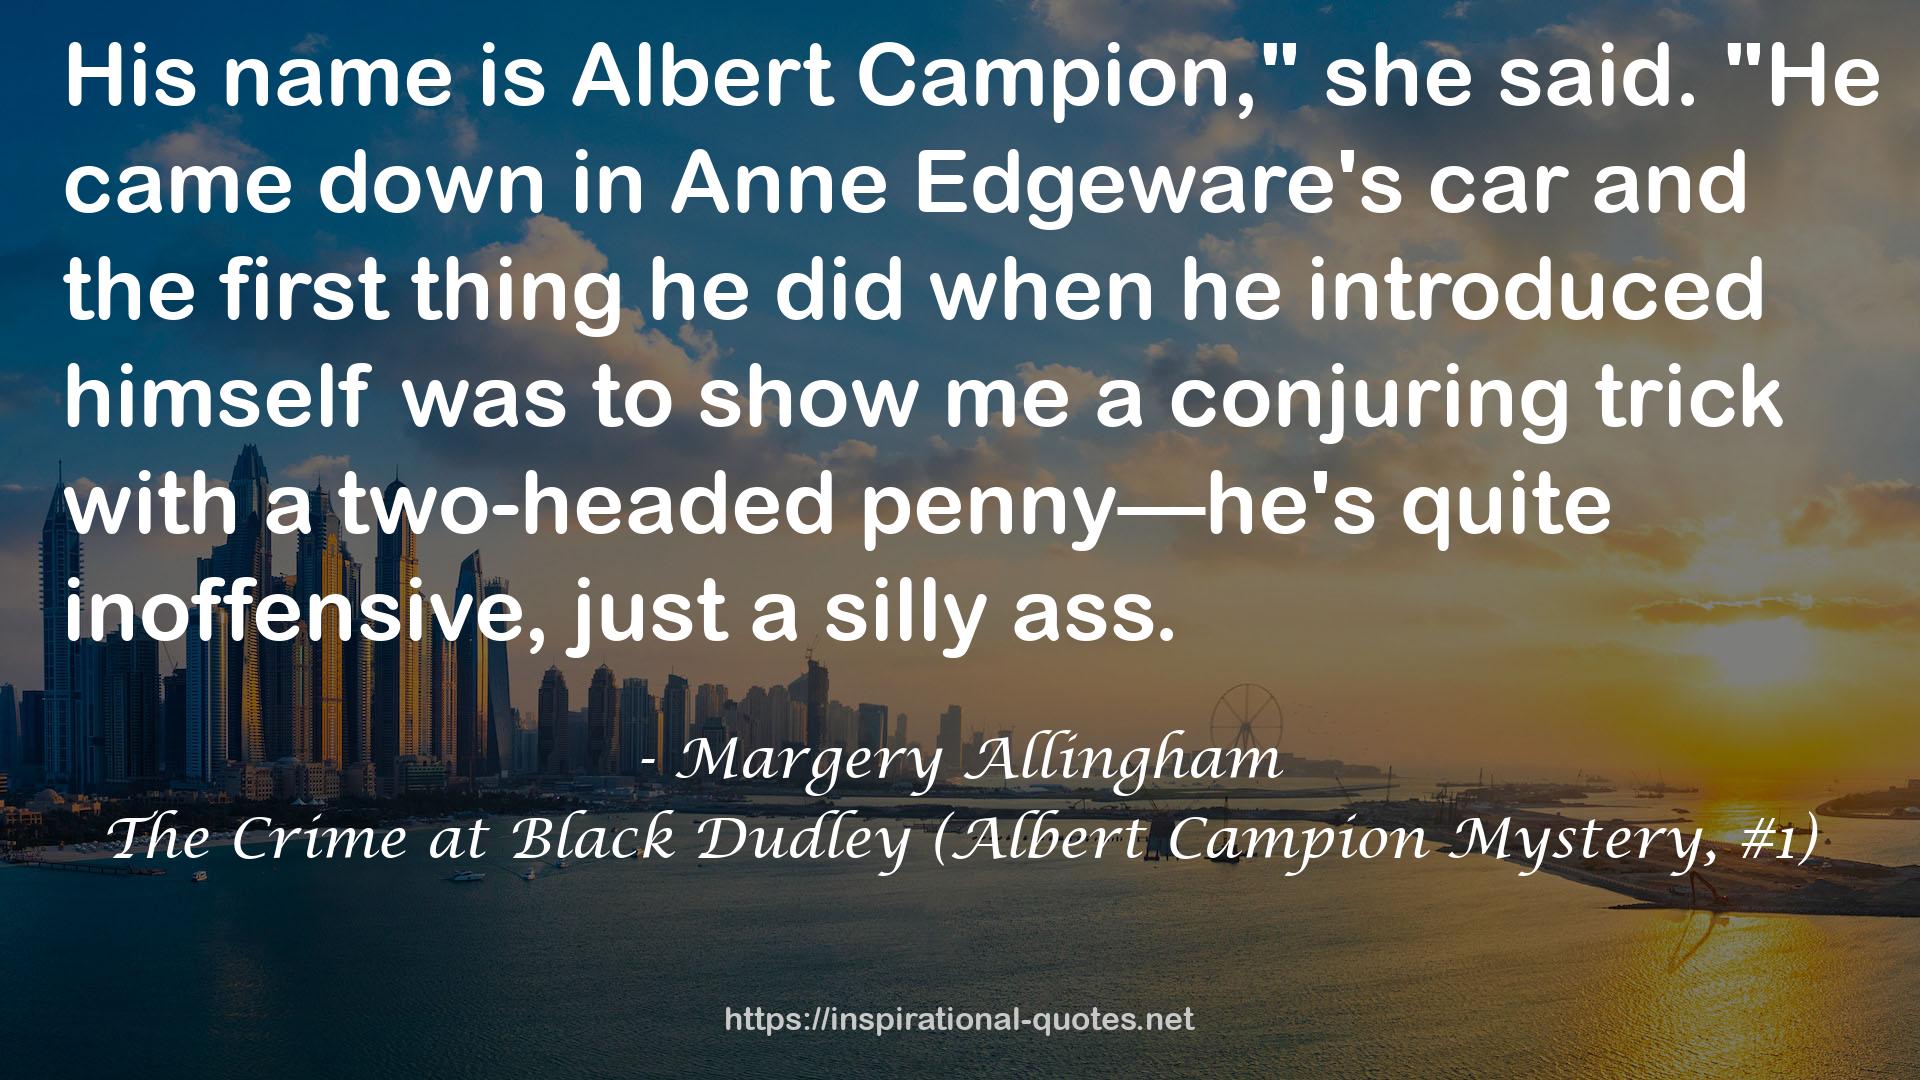 The Crime at Black Dudley (Albert Campion Mystery, #1) QUOTES